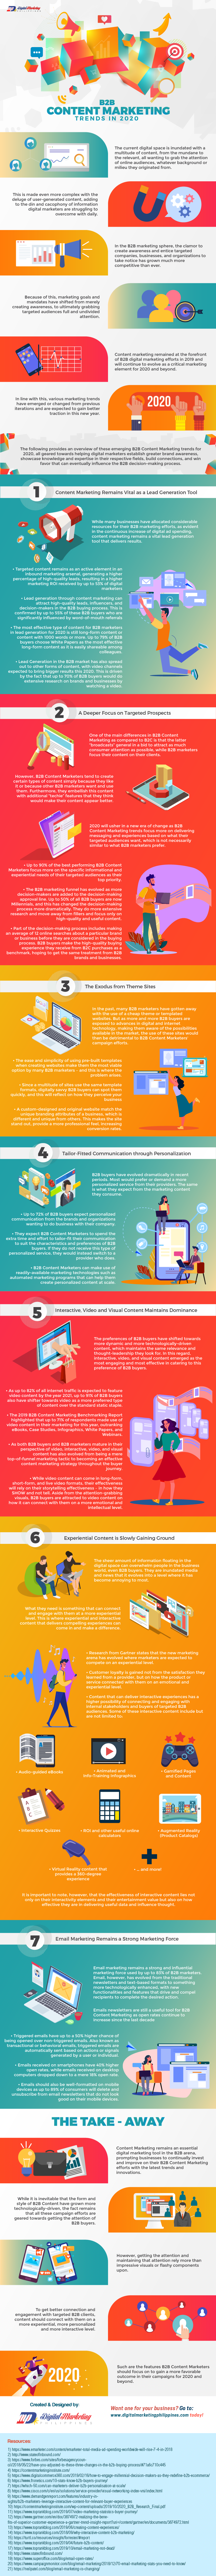 B2B Content Marketing Trends in 2020 [Infographic]